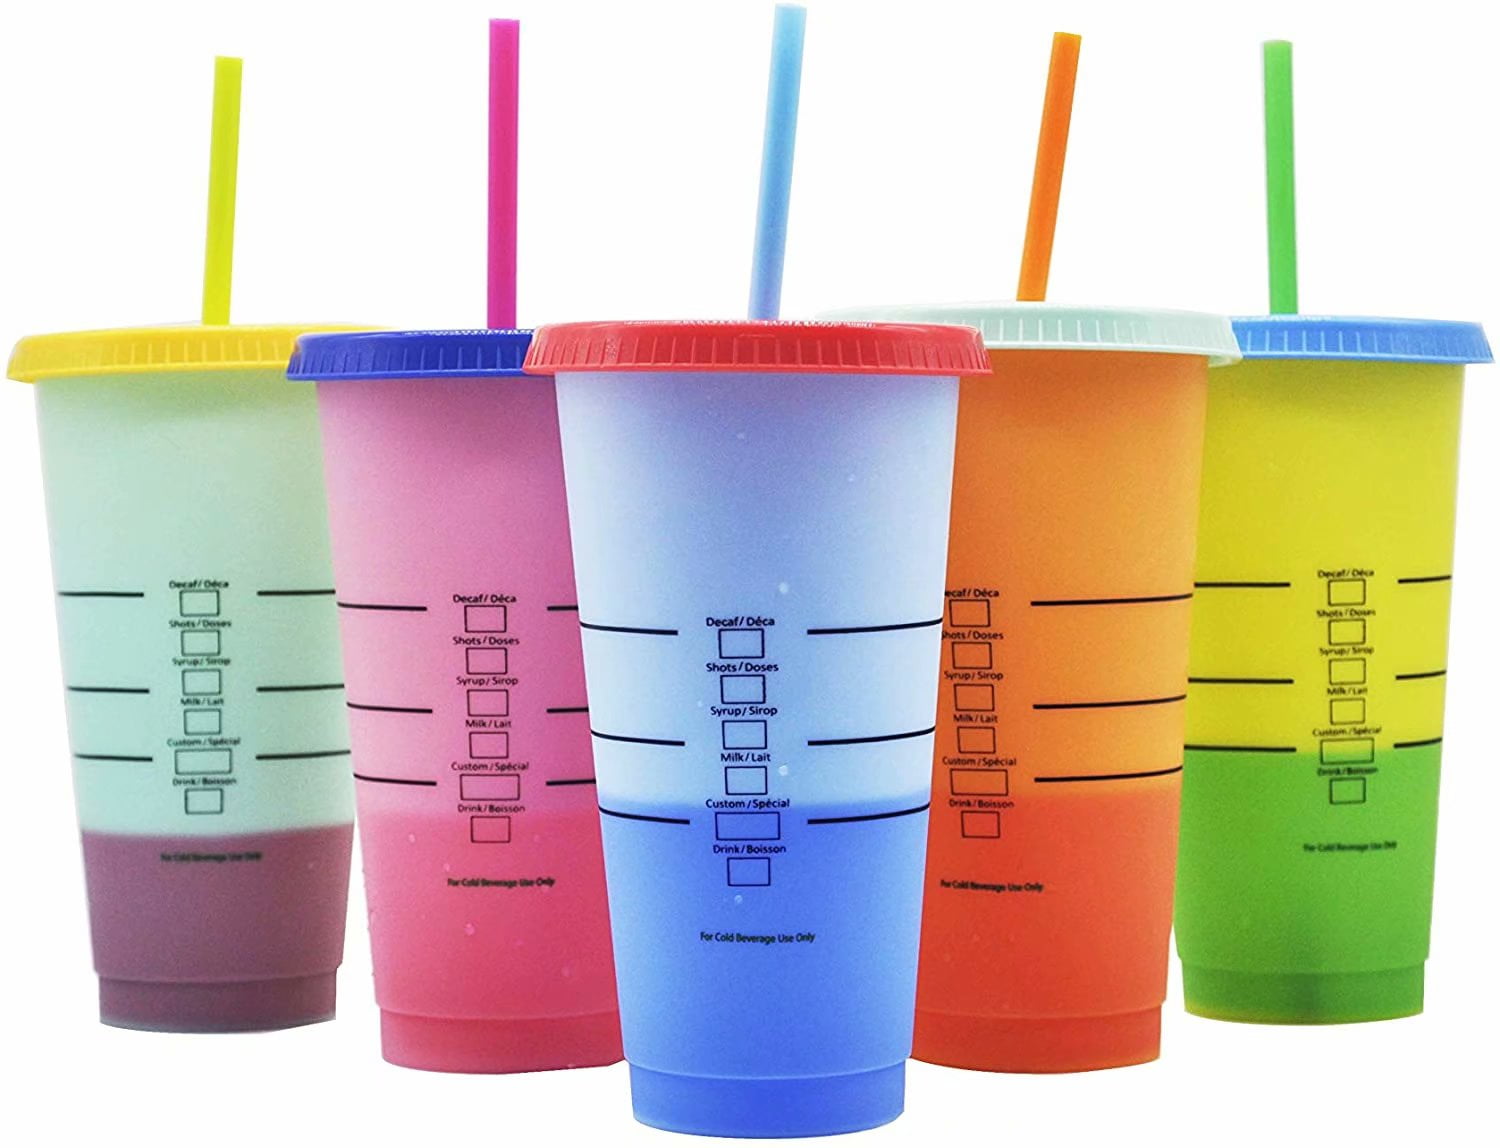 Triani Plastic Cups with Lids and Straws for Adults - 5 Reusable Cold Cups  in Bright Colors, 24oz Color Changing Cups Iced Coffee Cup,Smoothie